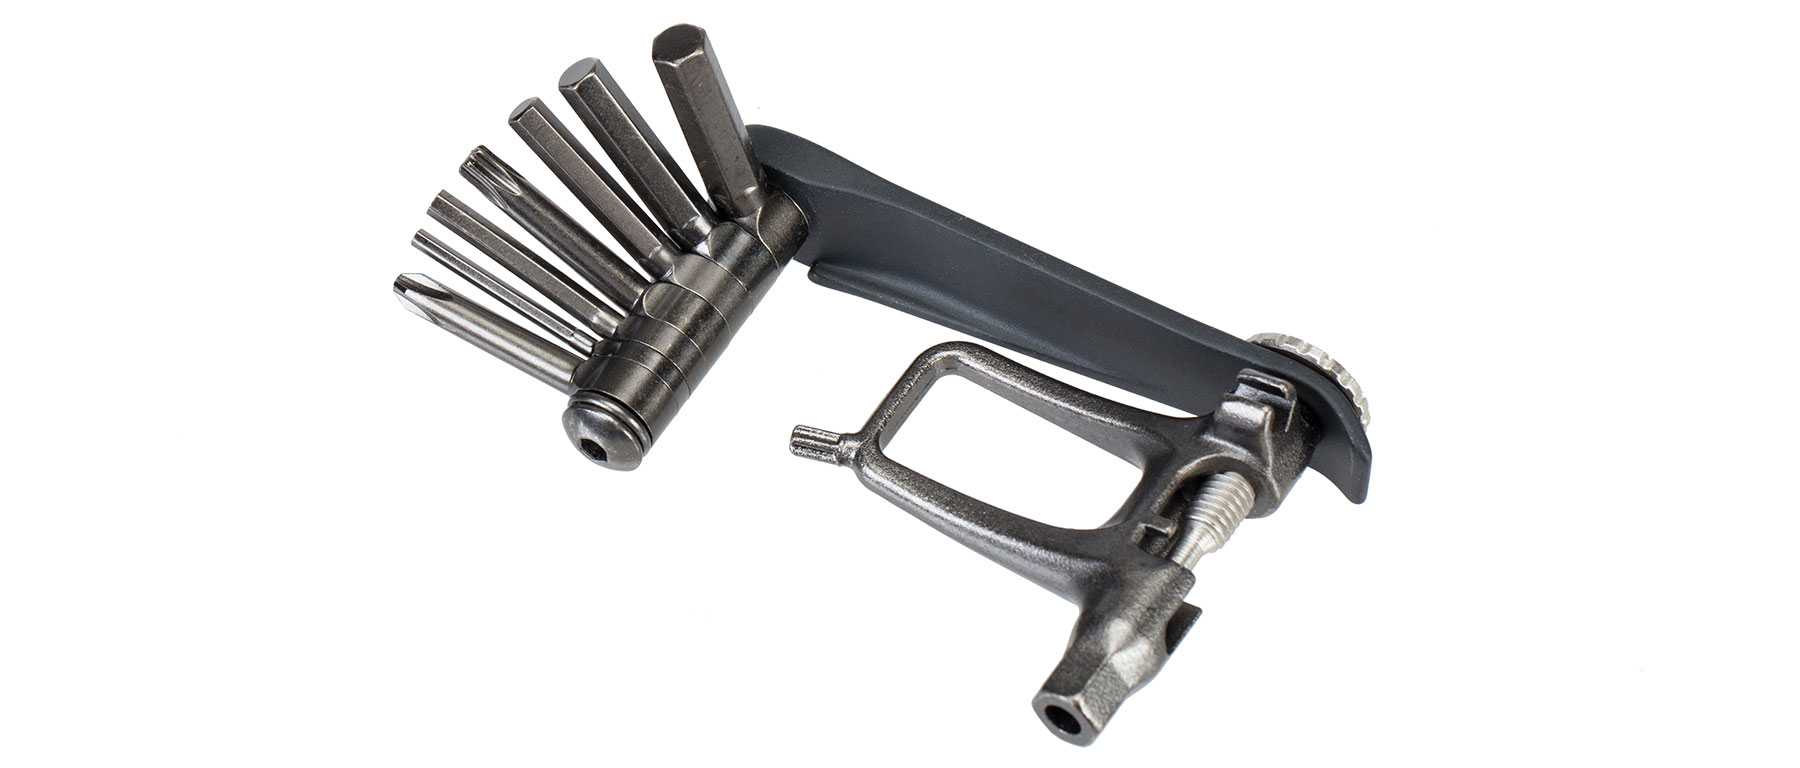 Ritchey CPR12 Multi Tool